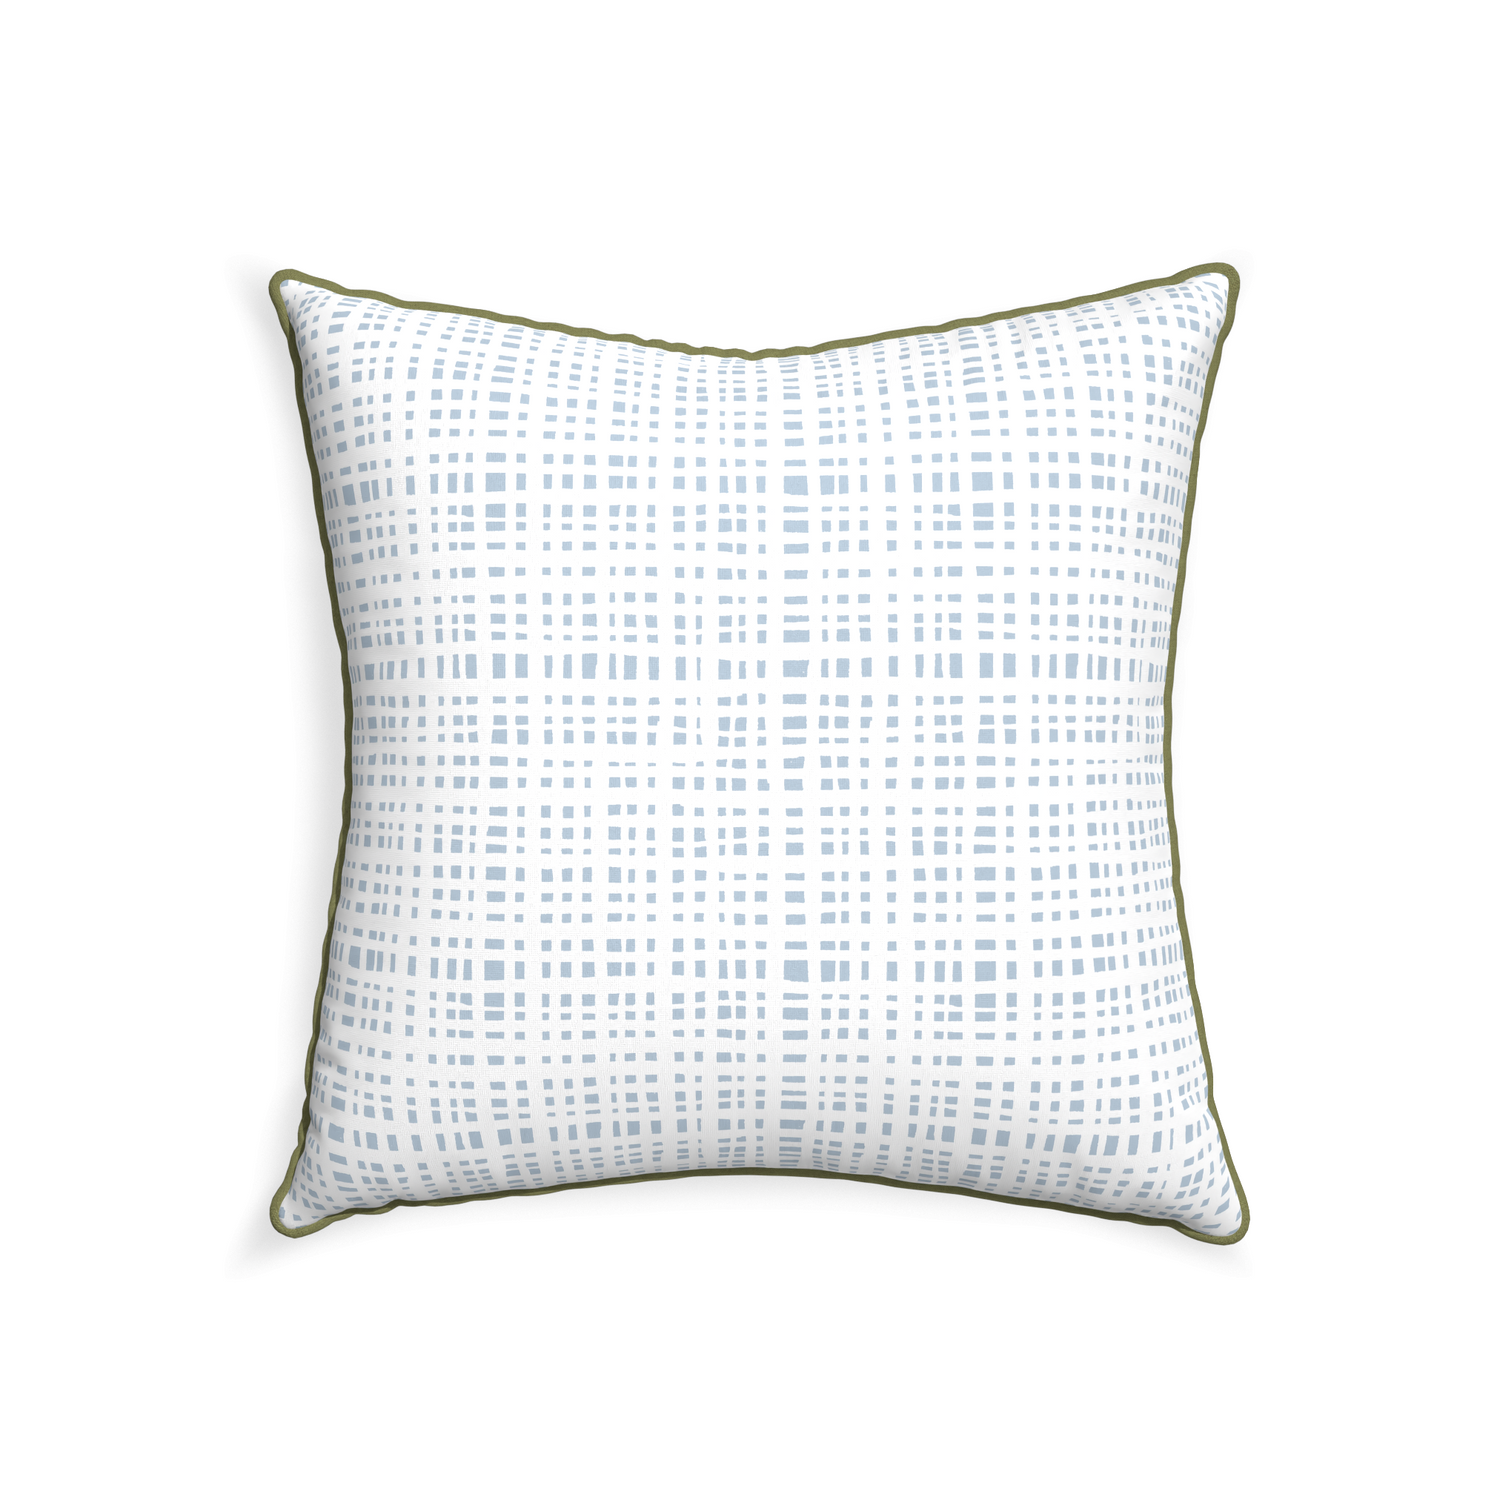 square plaid sky blue pillow with moss green piping